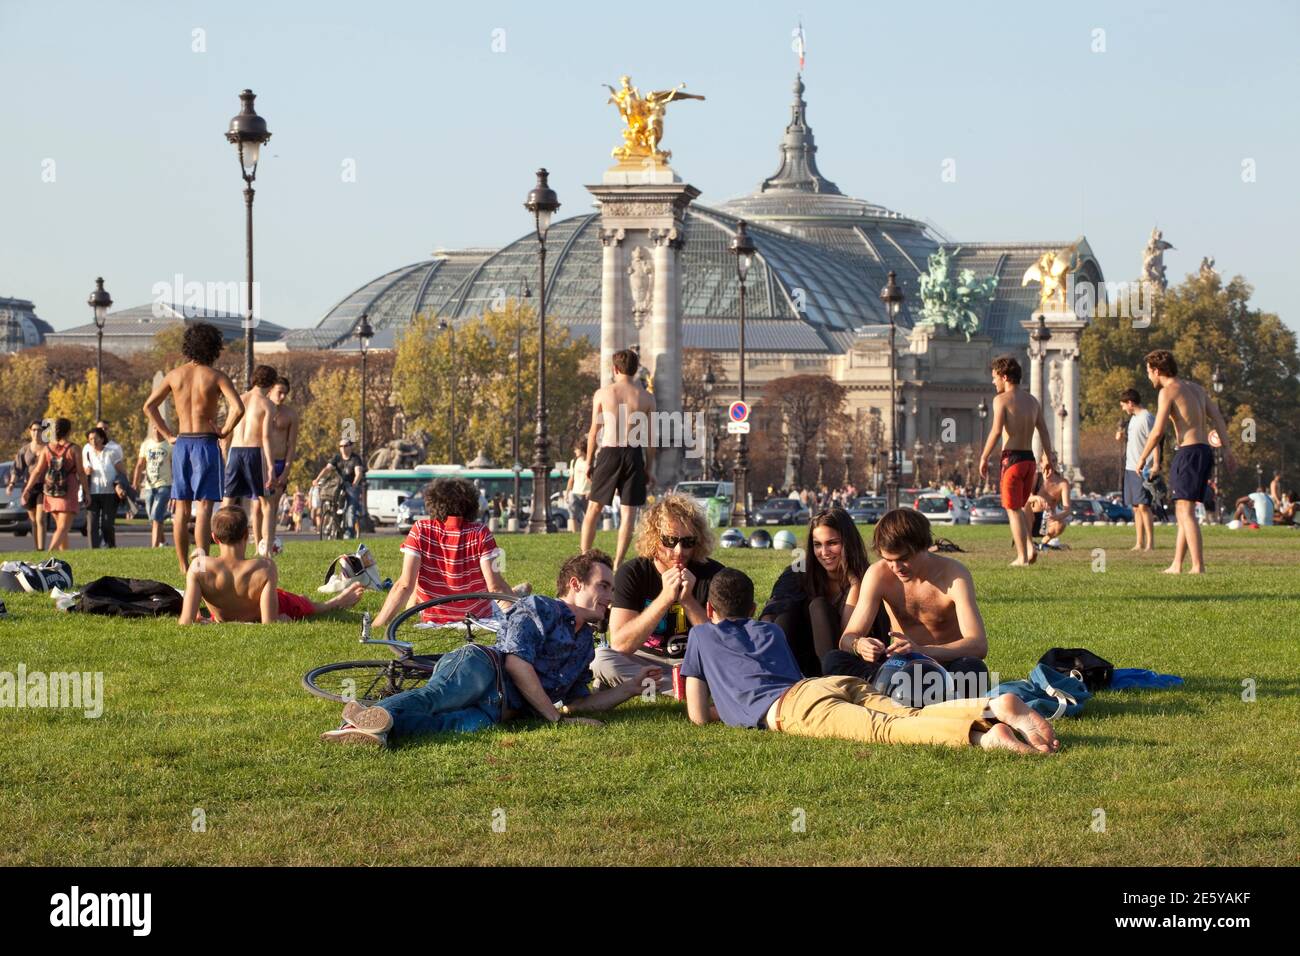 Young people on a lawn with the Grand Palais in the background. Stock Photo